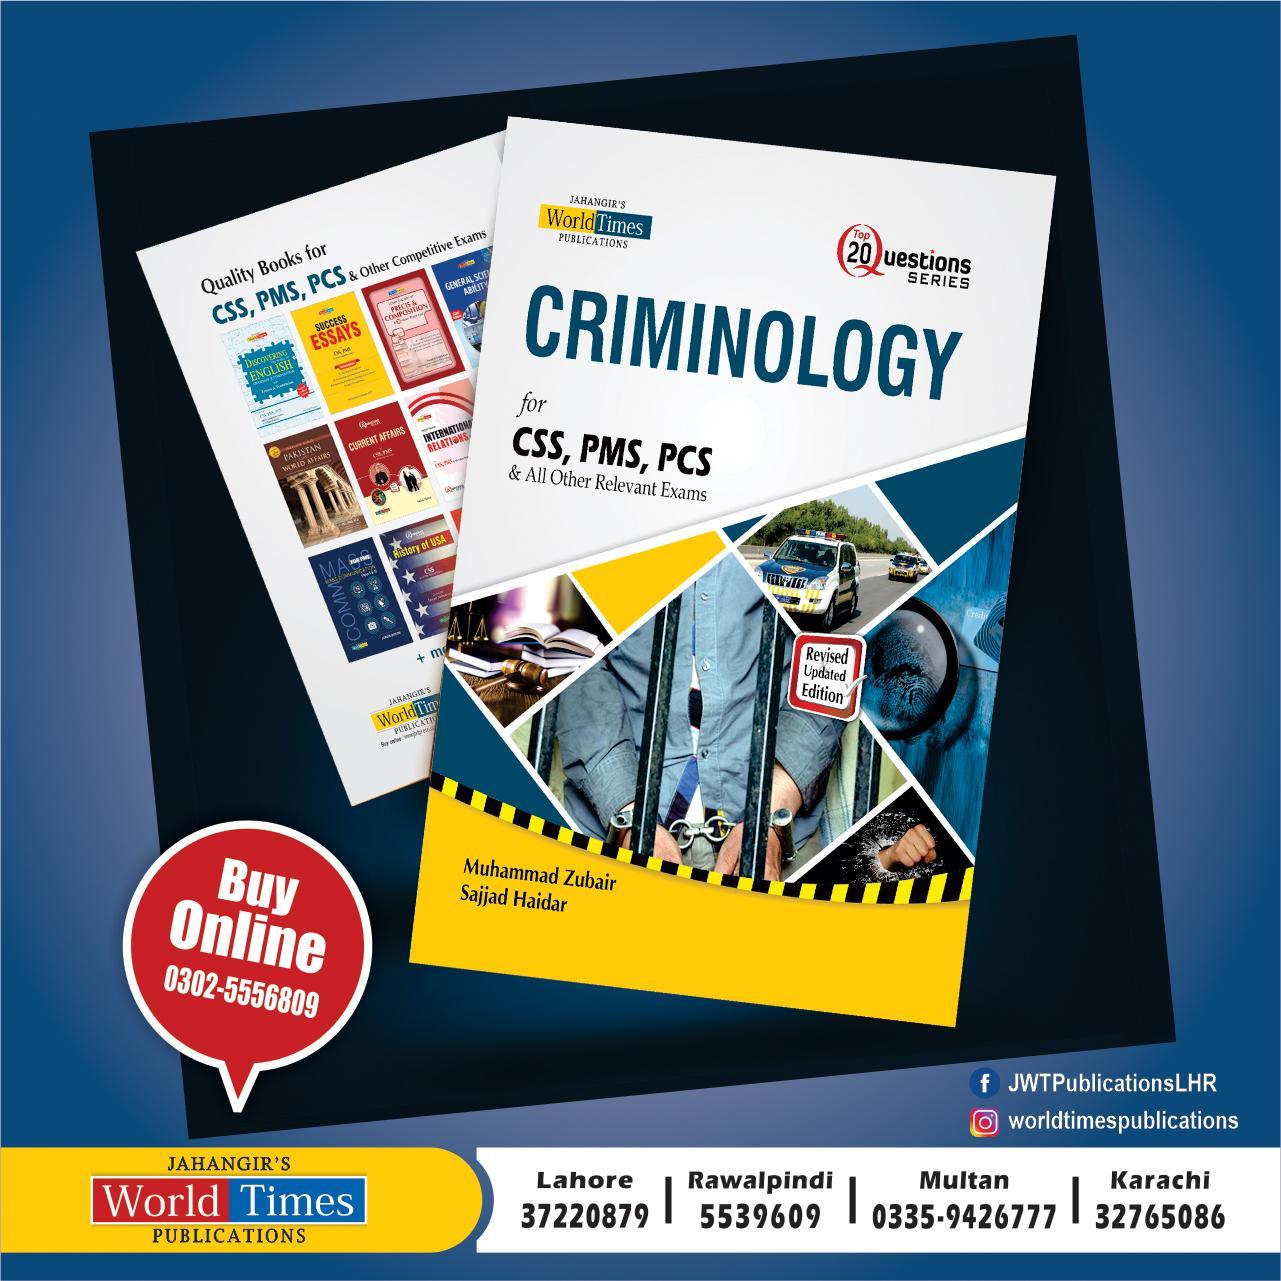 You are currently viewing Top 20 Questions Criminology (17-02-23)